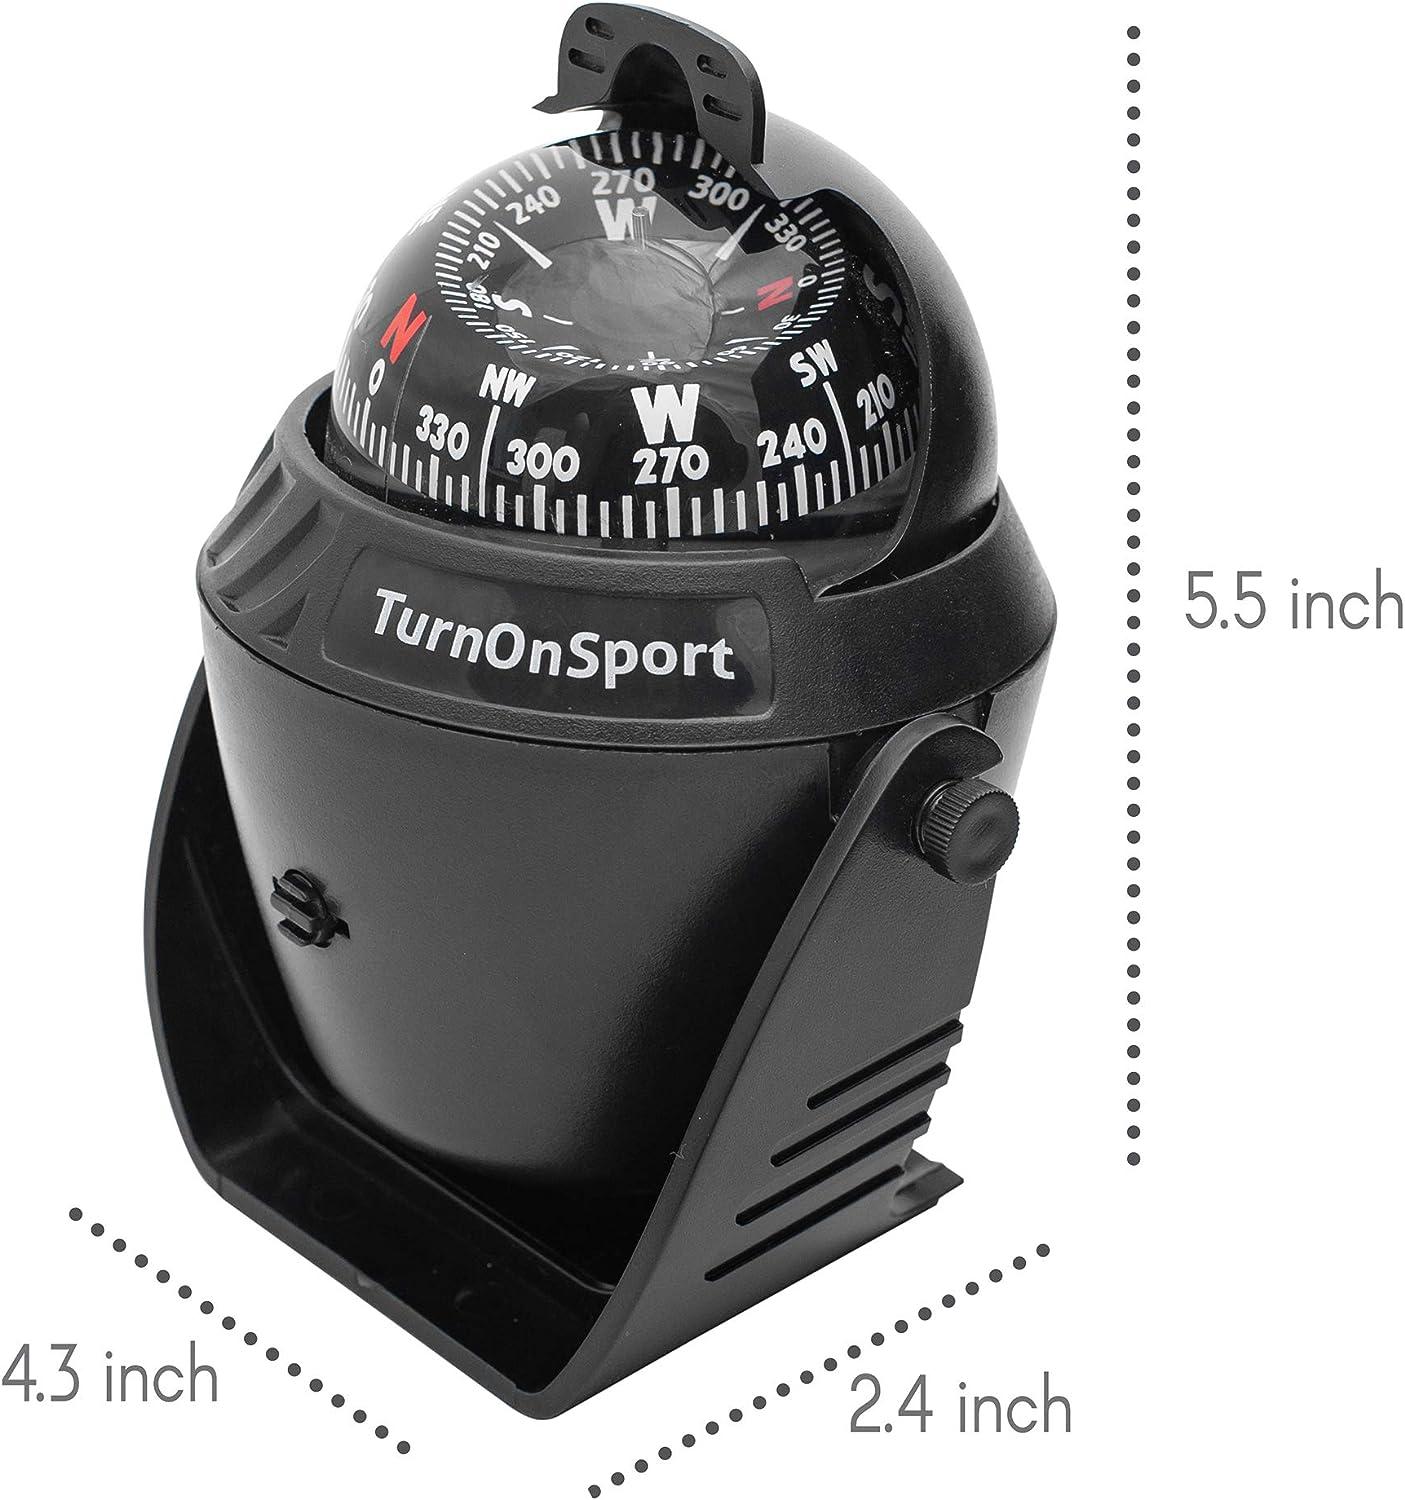  Boat Compass Dash Mount Flush - Boating Compass Dashboard  Suction - Navigation Marine Compass Boats Surface Mount - Illuminated  Dashboard Compass Ship - Electronic Sea Compass Suction Cup (Black) :  Sports & Outdoors